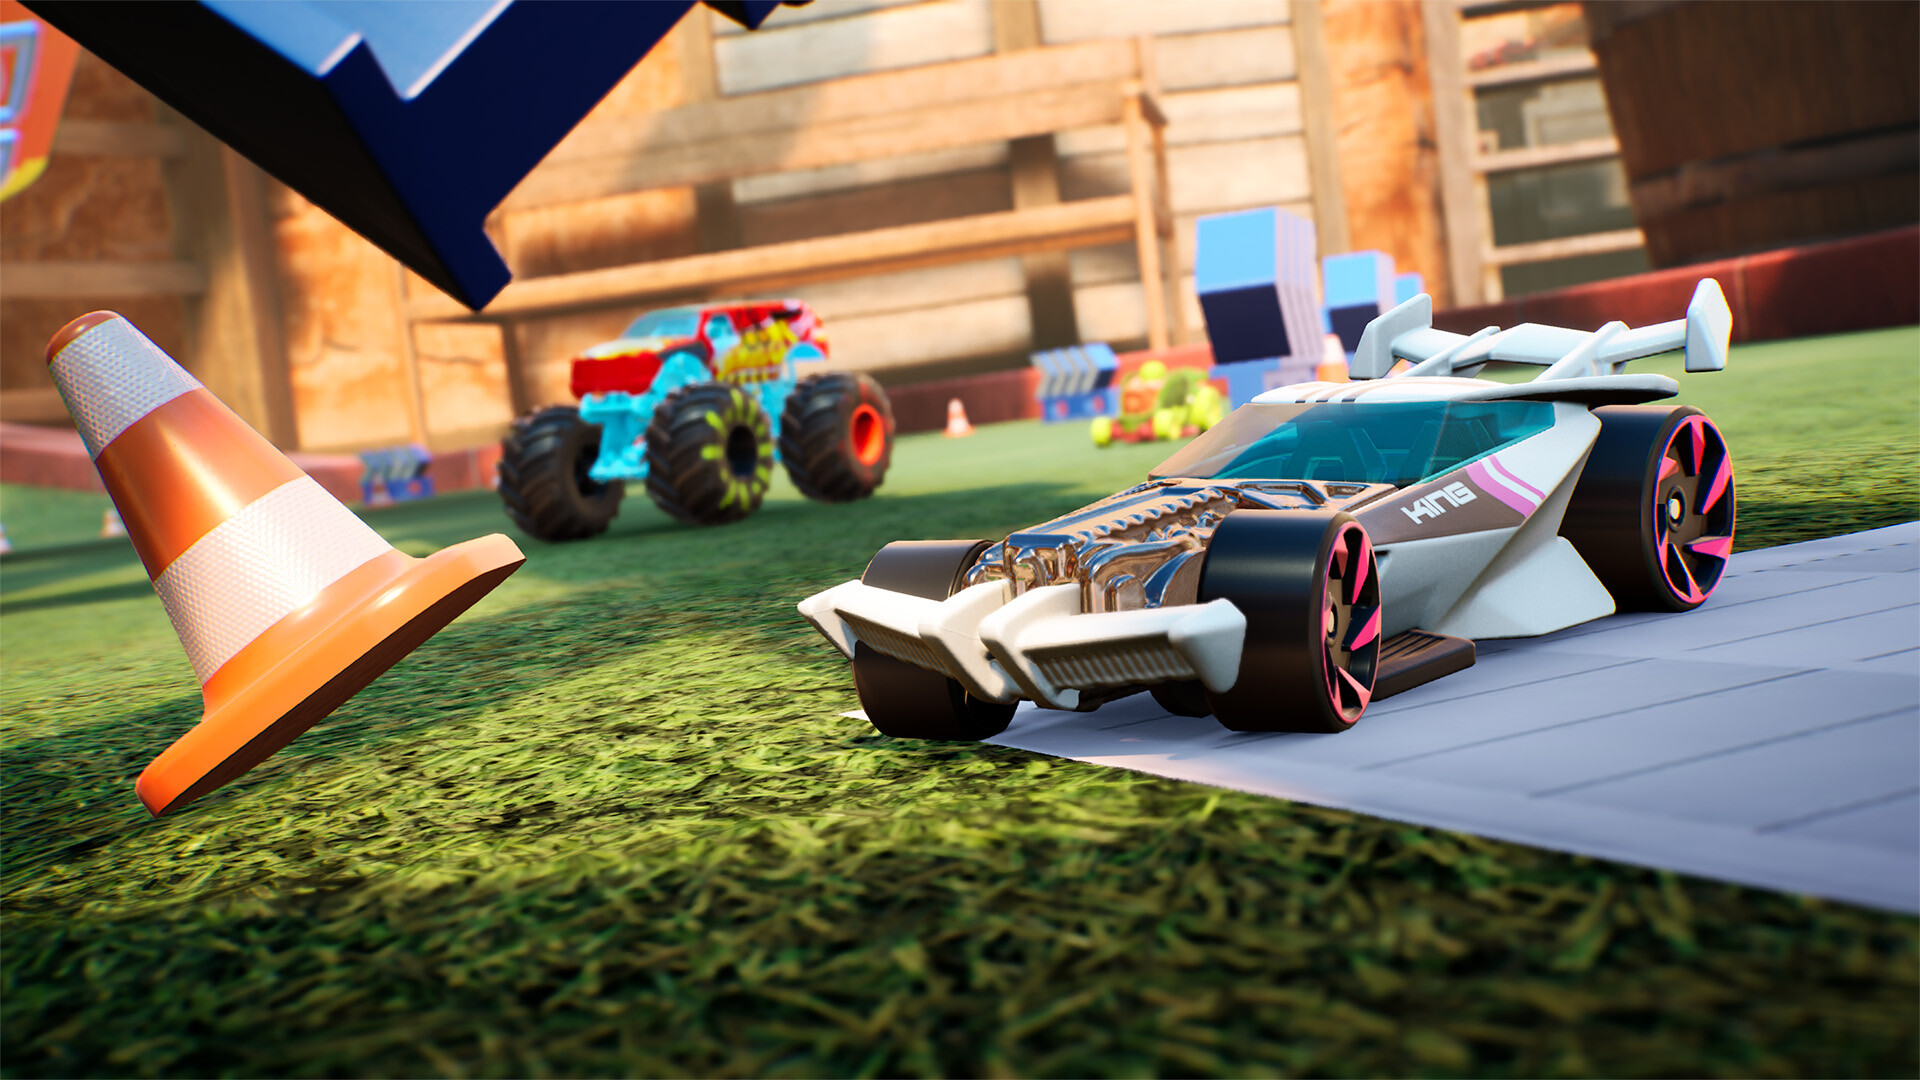 HOT WHEELS UNLEASHED™ on Steam